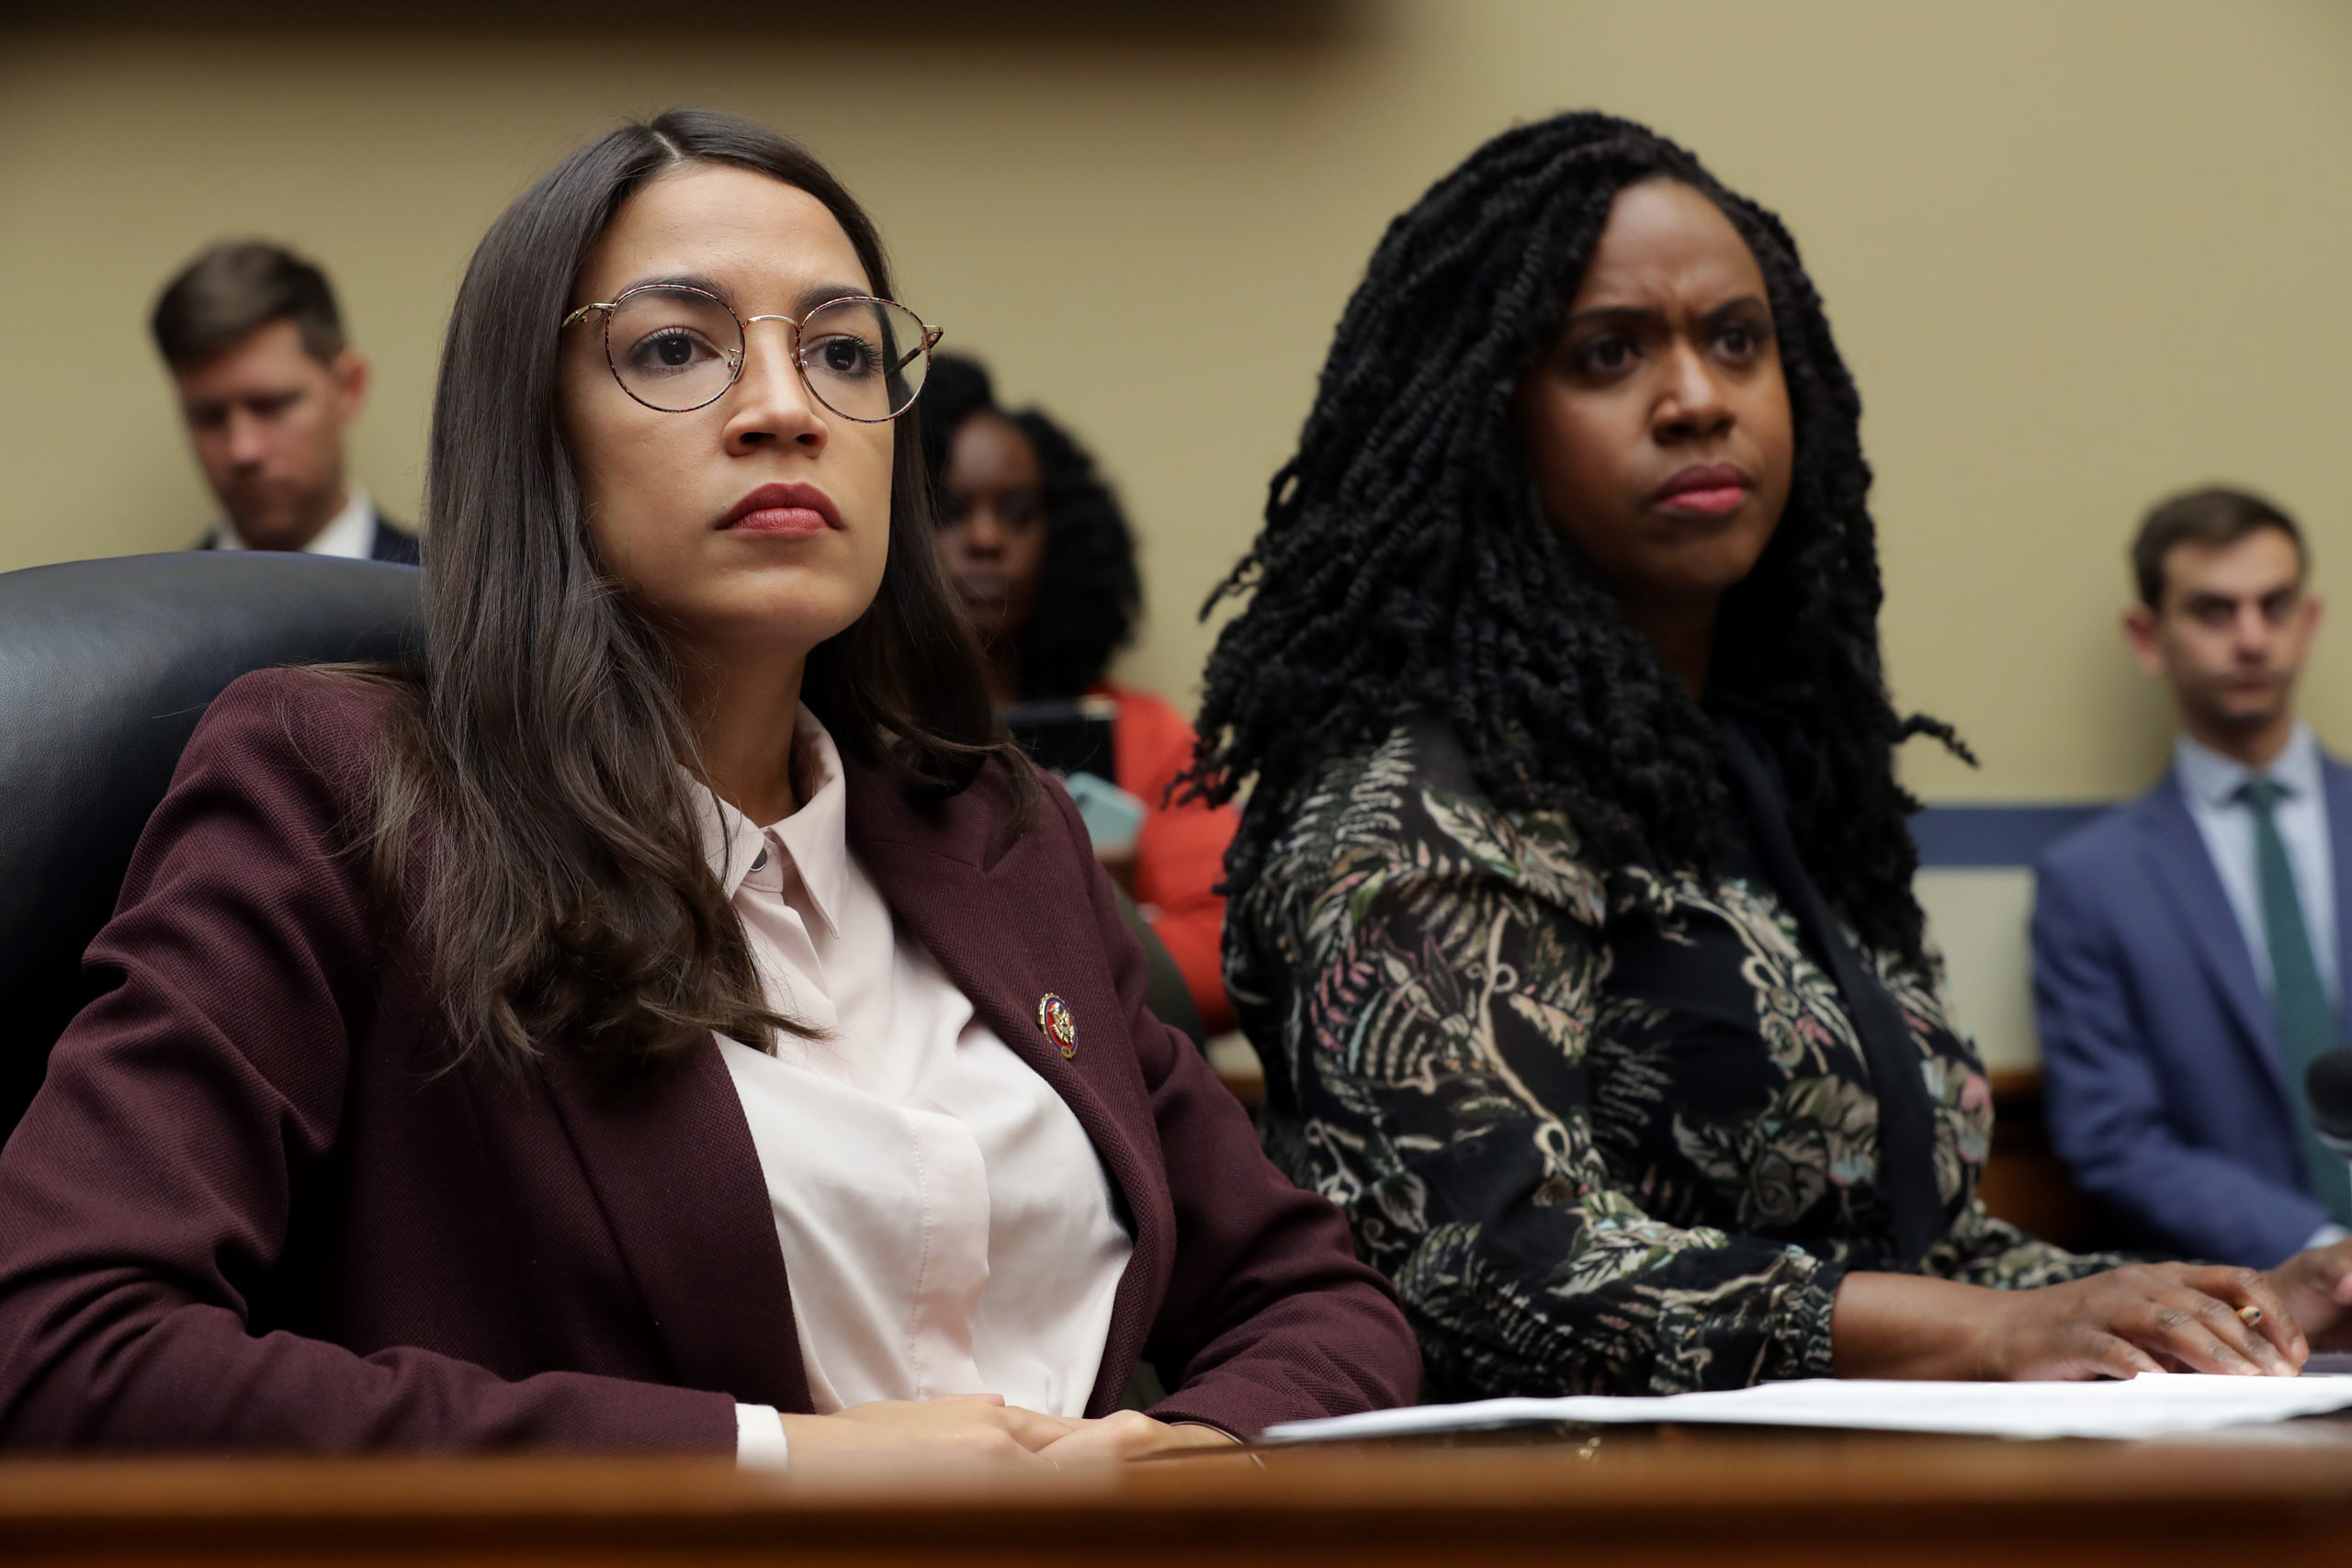 House Oversight and Government Reform Committee members Rep. Alexandria Ocasio-Cortez (D-NY) (L) and Rep. Ayanna Pressley (D-MA) attend a hearing on drug pricing in the Rayburn House Office building on Capitol Hill July 26, 2019 in Washington, DC. As members of a group of four freshman Democratic women of color, known informally as 'The Squad,' the congresswomen heard testimony from patients and their family members about the negative impacts of rising drug prices in the United States. (Photo by Chip Somodevilla/Getty Images)